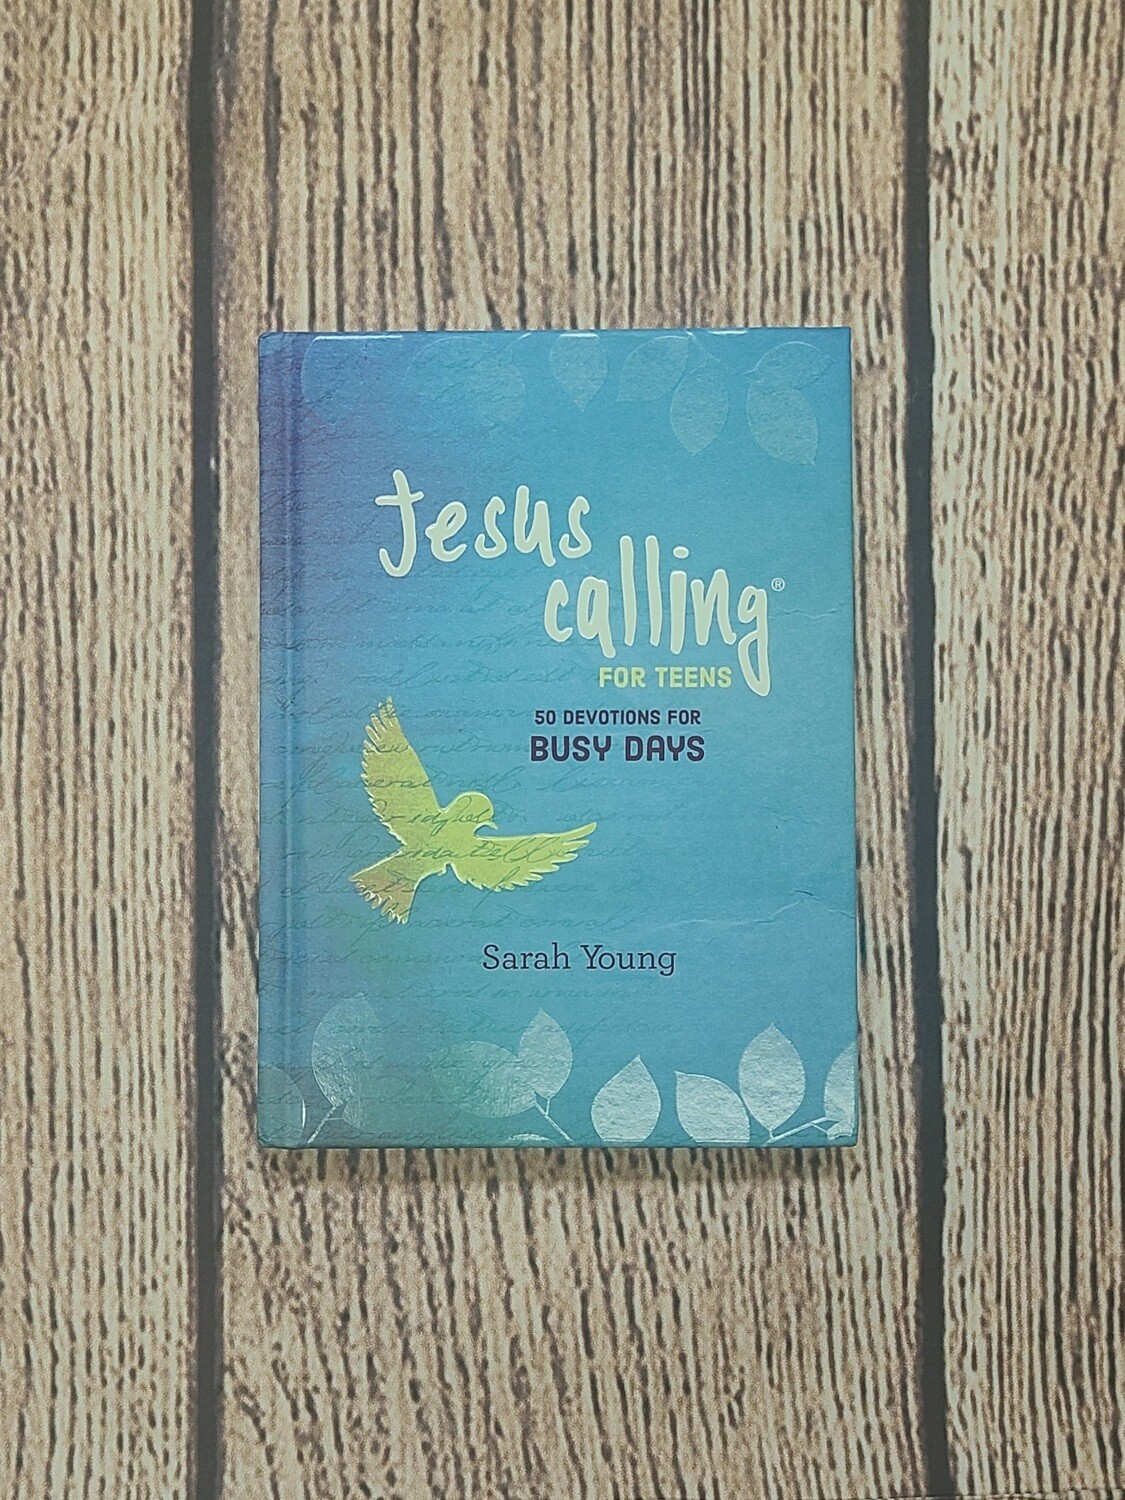 Jesus Calling for Teens: 50 Devotions for Busy Days by Sarah Young